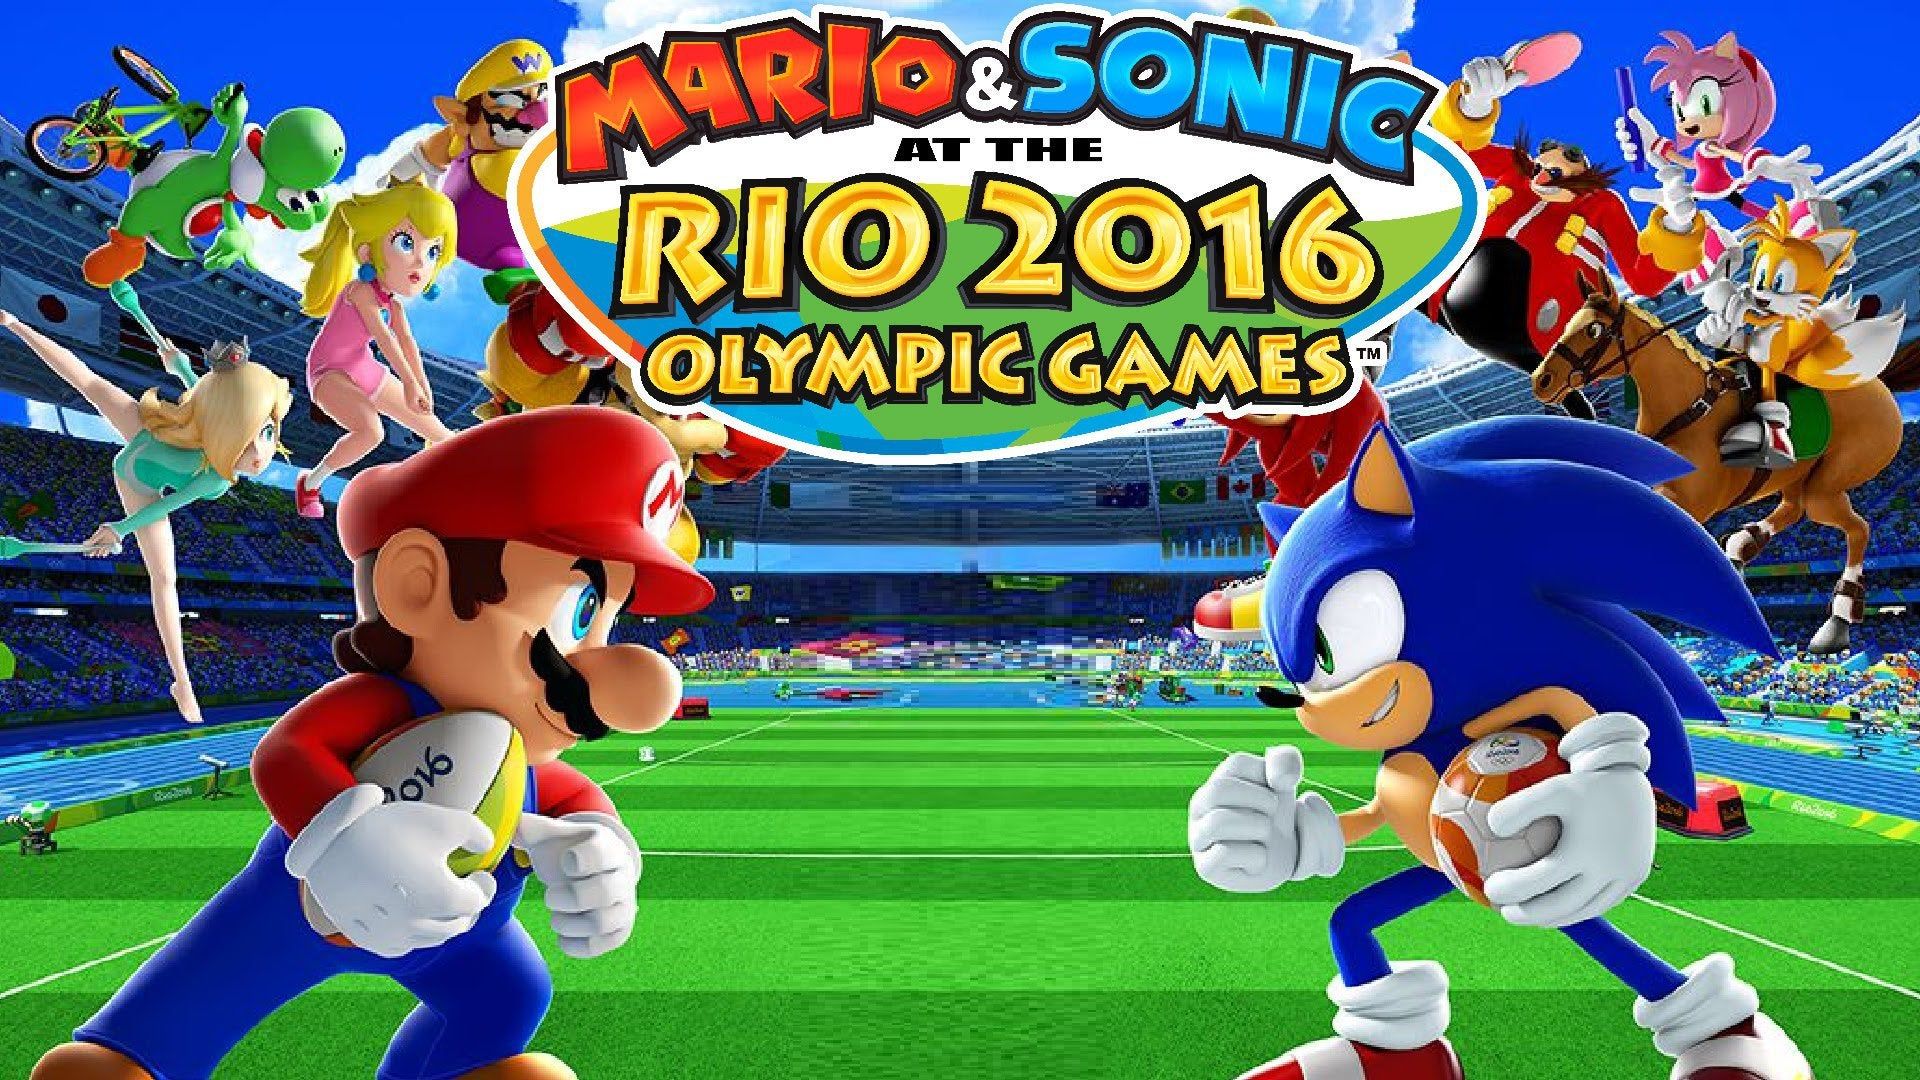 Mario & Sonic at the Rio 2016 Olympic Games [1920x1080]